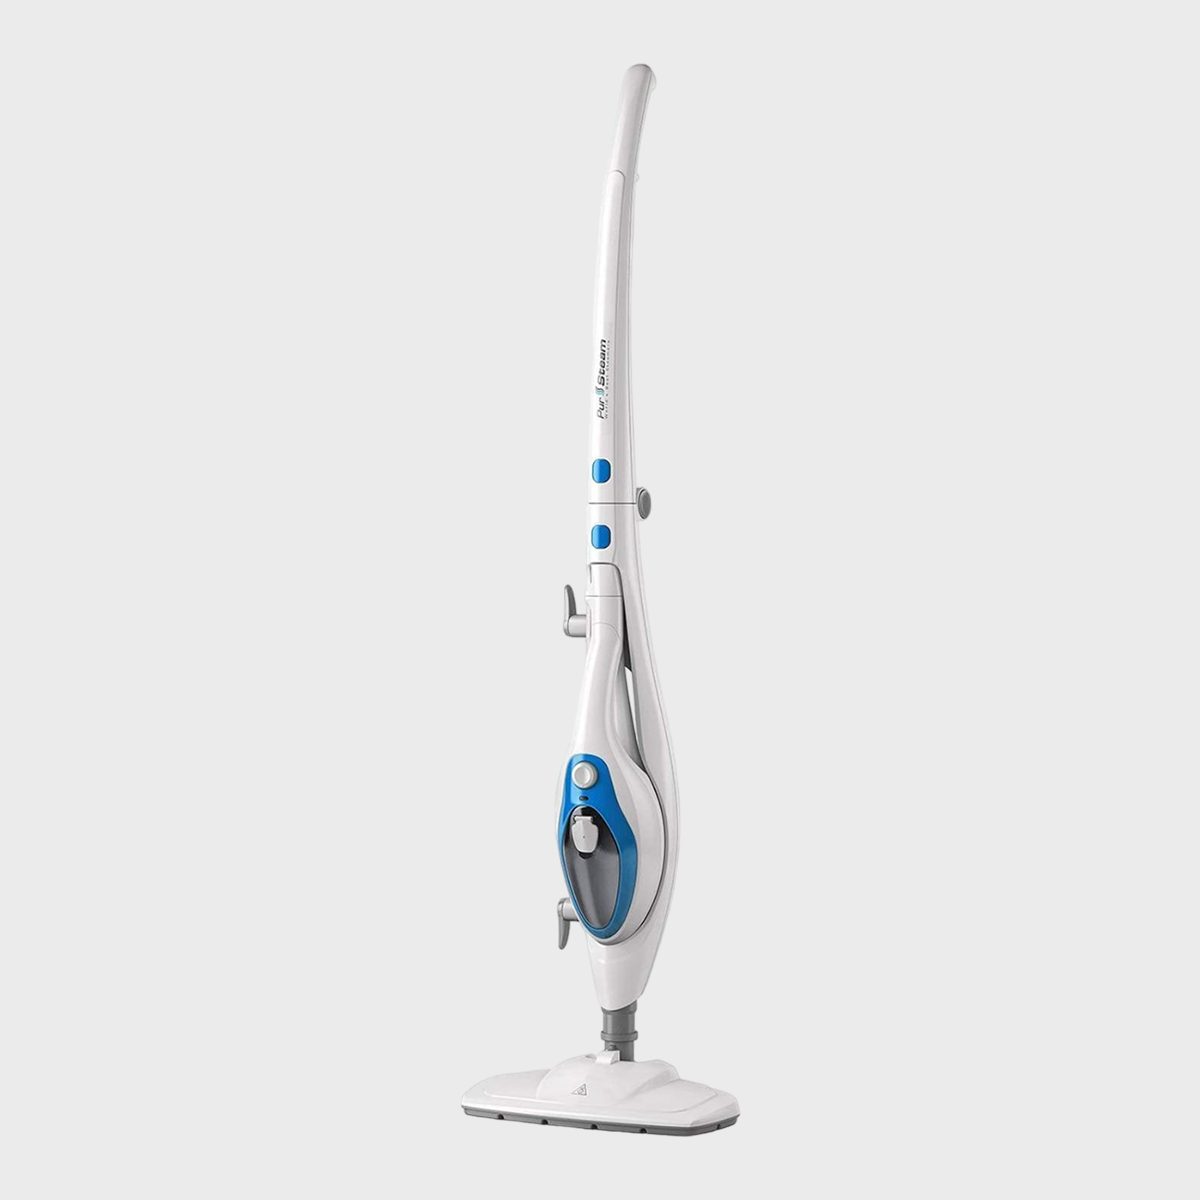 https://www.rd.com/wp-content/uploads/2023/06/PurSteam-10-in-1-Steam-Cleaner_ecomm_via-amazon.com_.jpg?fit=700%2C700